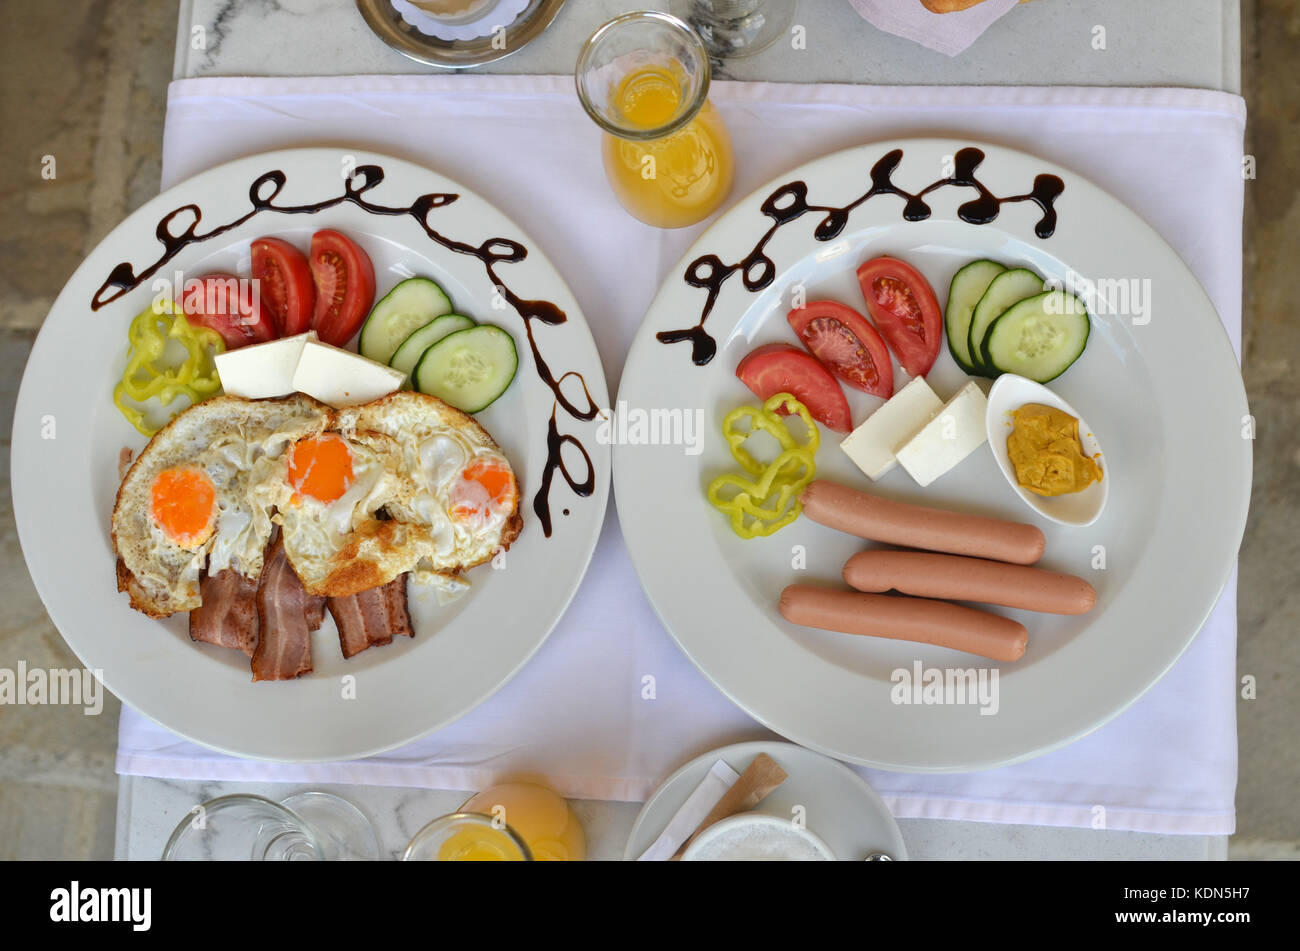 Plates with served breakfast - fried eggs, bacon, hot dogs and fresh vegetables Stock Photo